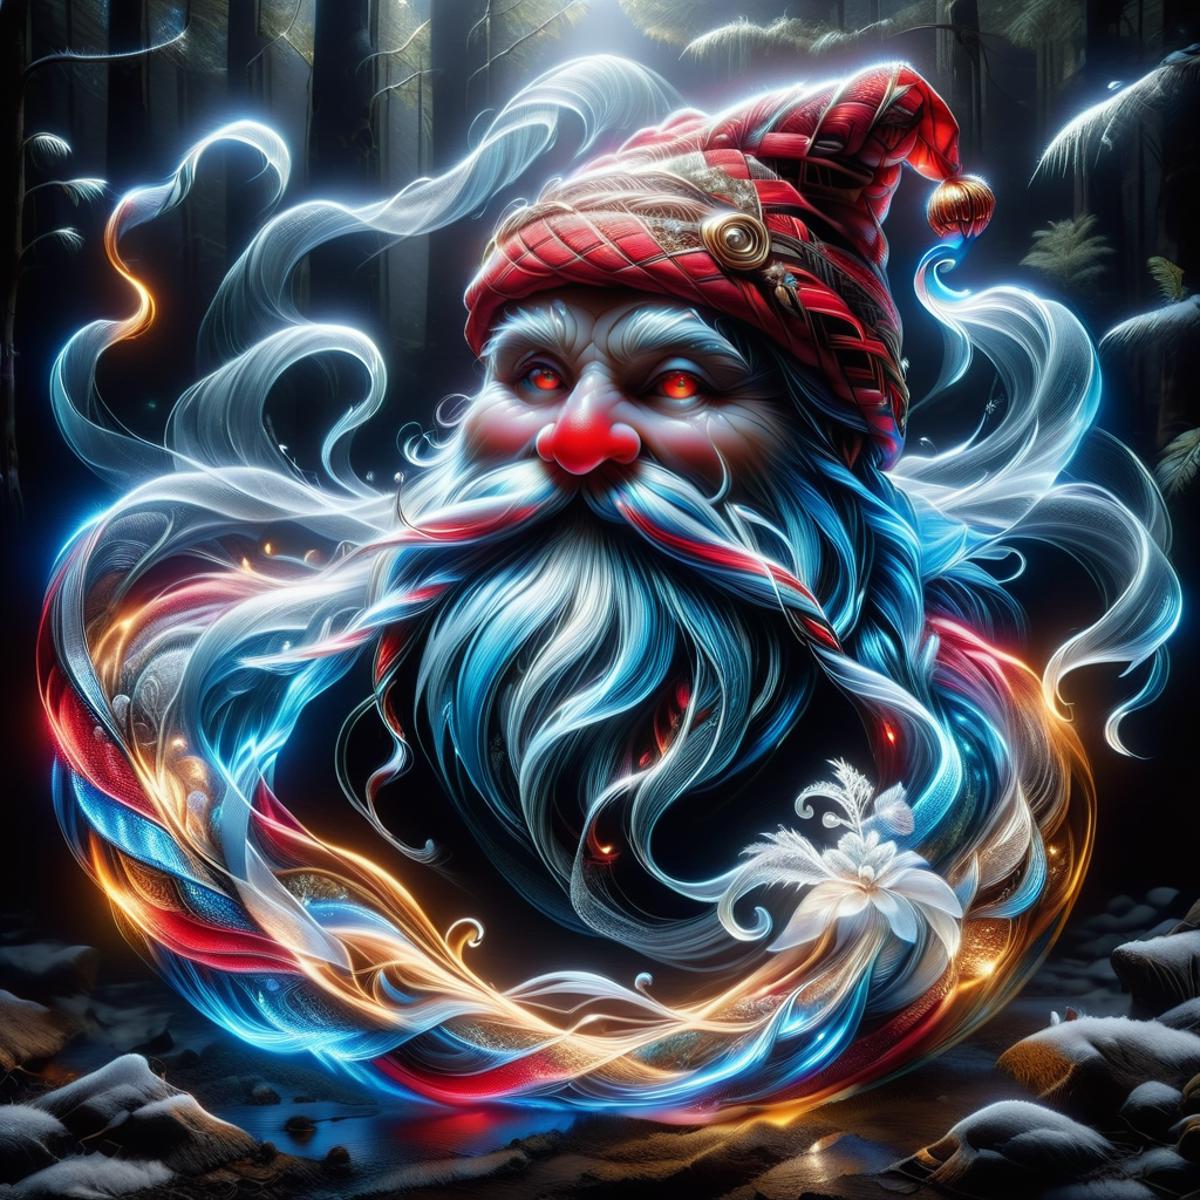 A surrealistic painting of a bearded man in a red hat with white whiskers, surrounded by swirling colors and smoke.